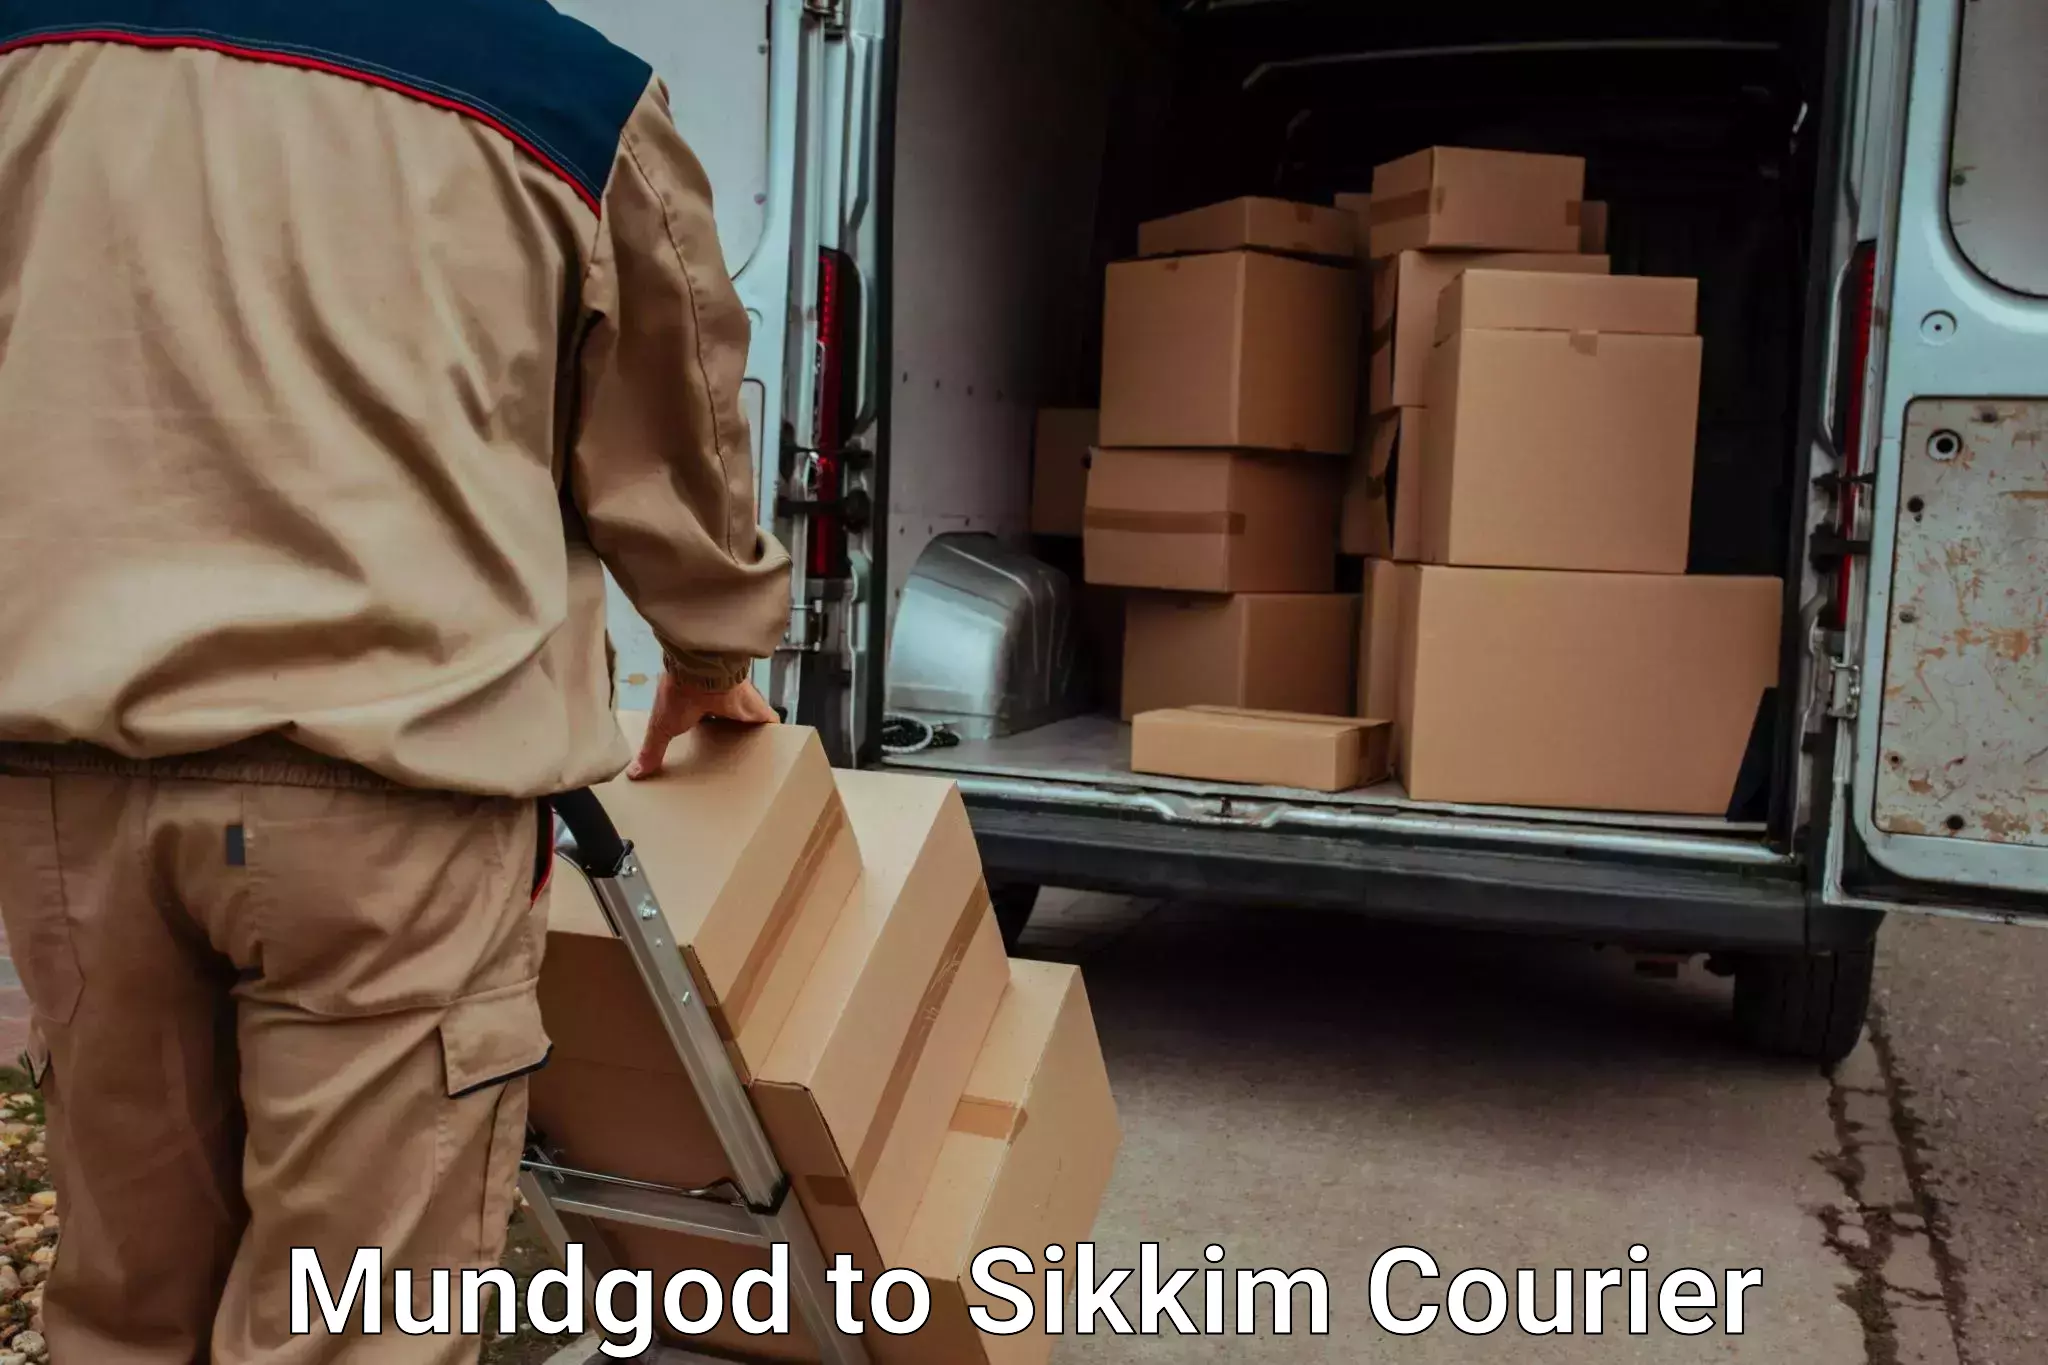 Trusted relocation experts Mundgod to Sikkim